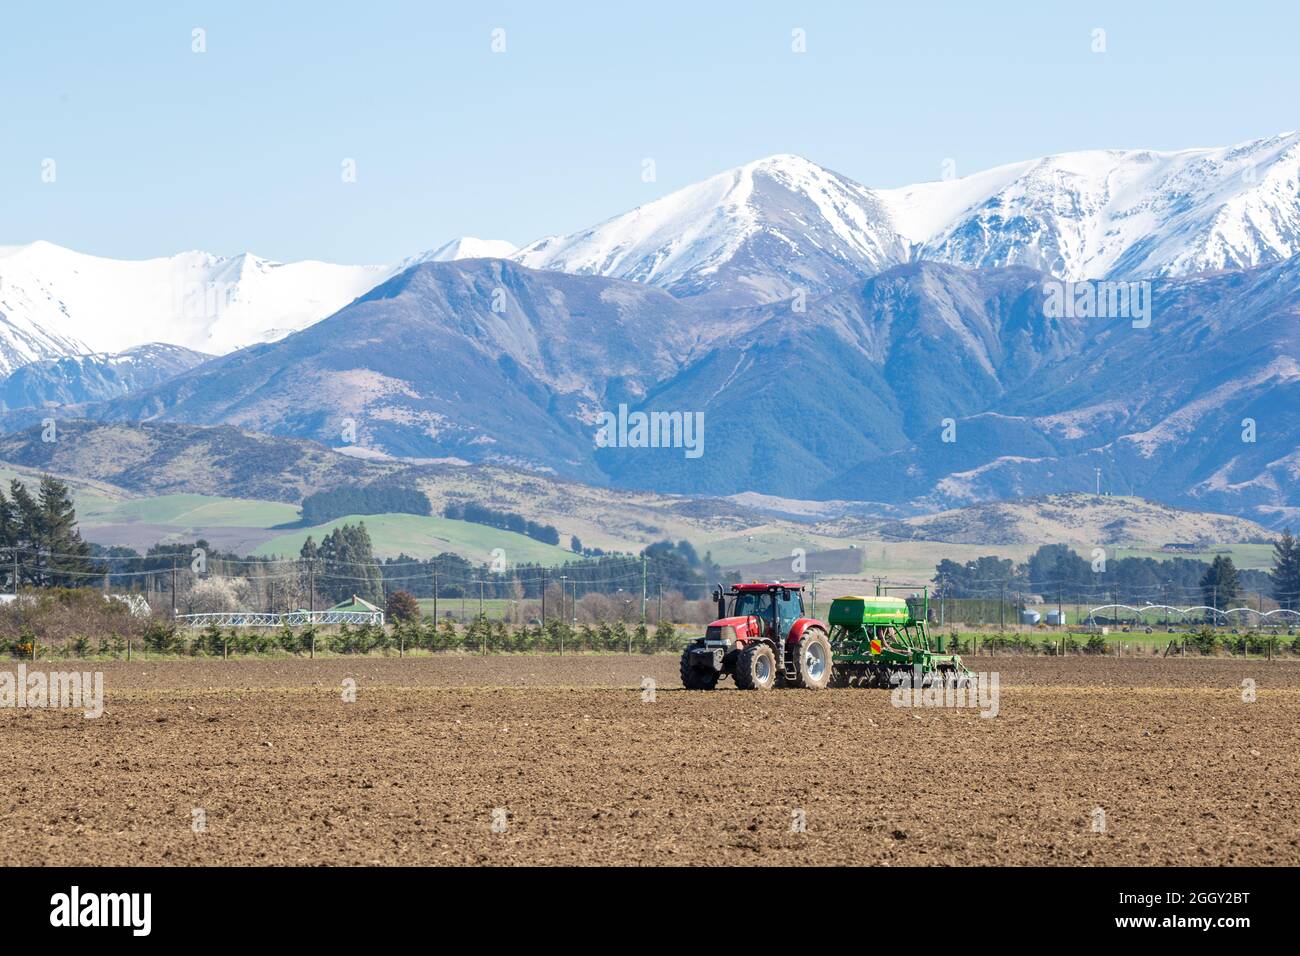 Sheffield, Canterbury, New Zealand, September 3 2021: A farmer drills a newly plowed field at the start of spring Stock Photo